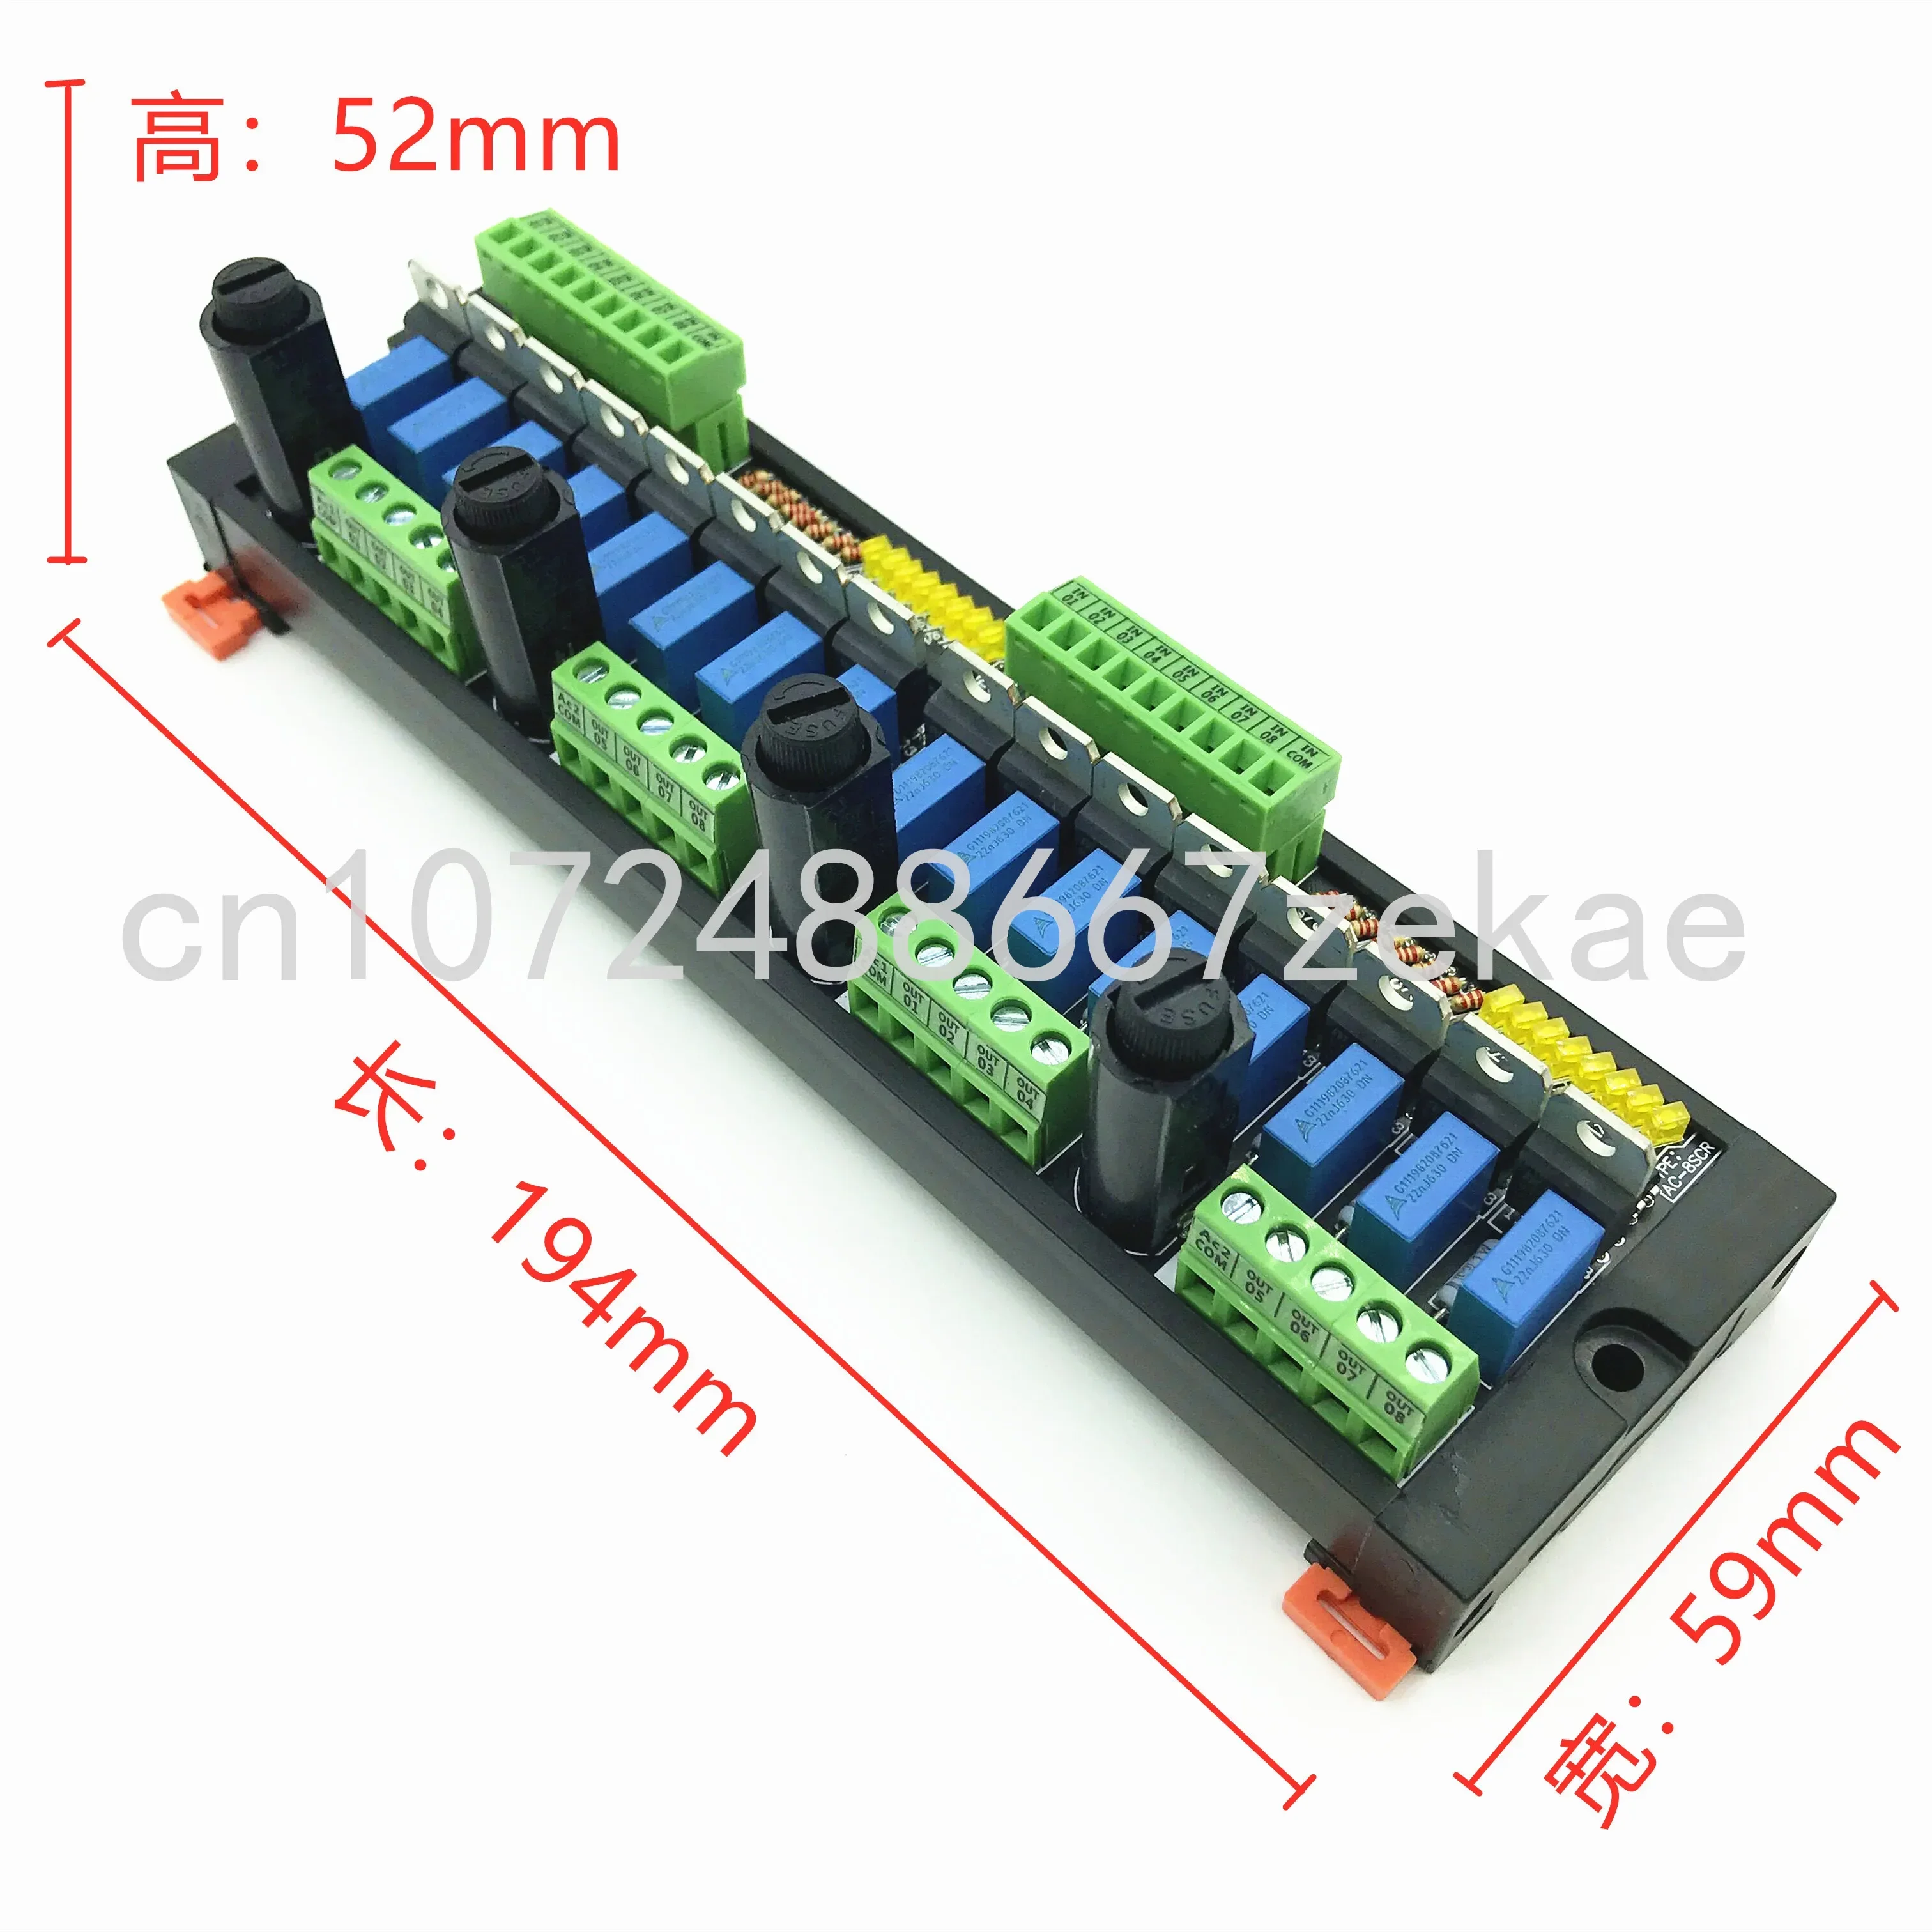 

16-channel PLC AC Power Amplifier Board SCR Optocoupler Isolation Non-contact Solid State Relay 220V